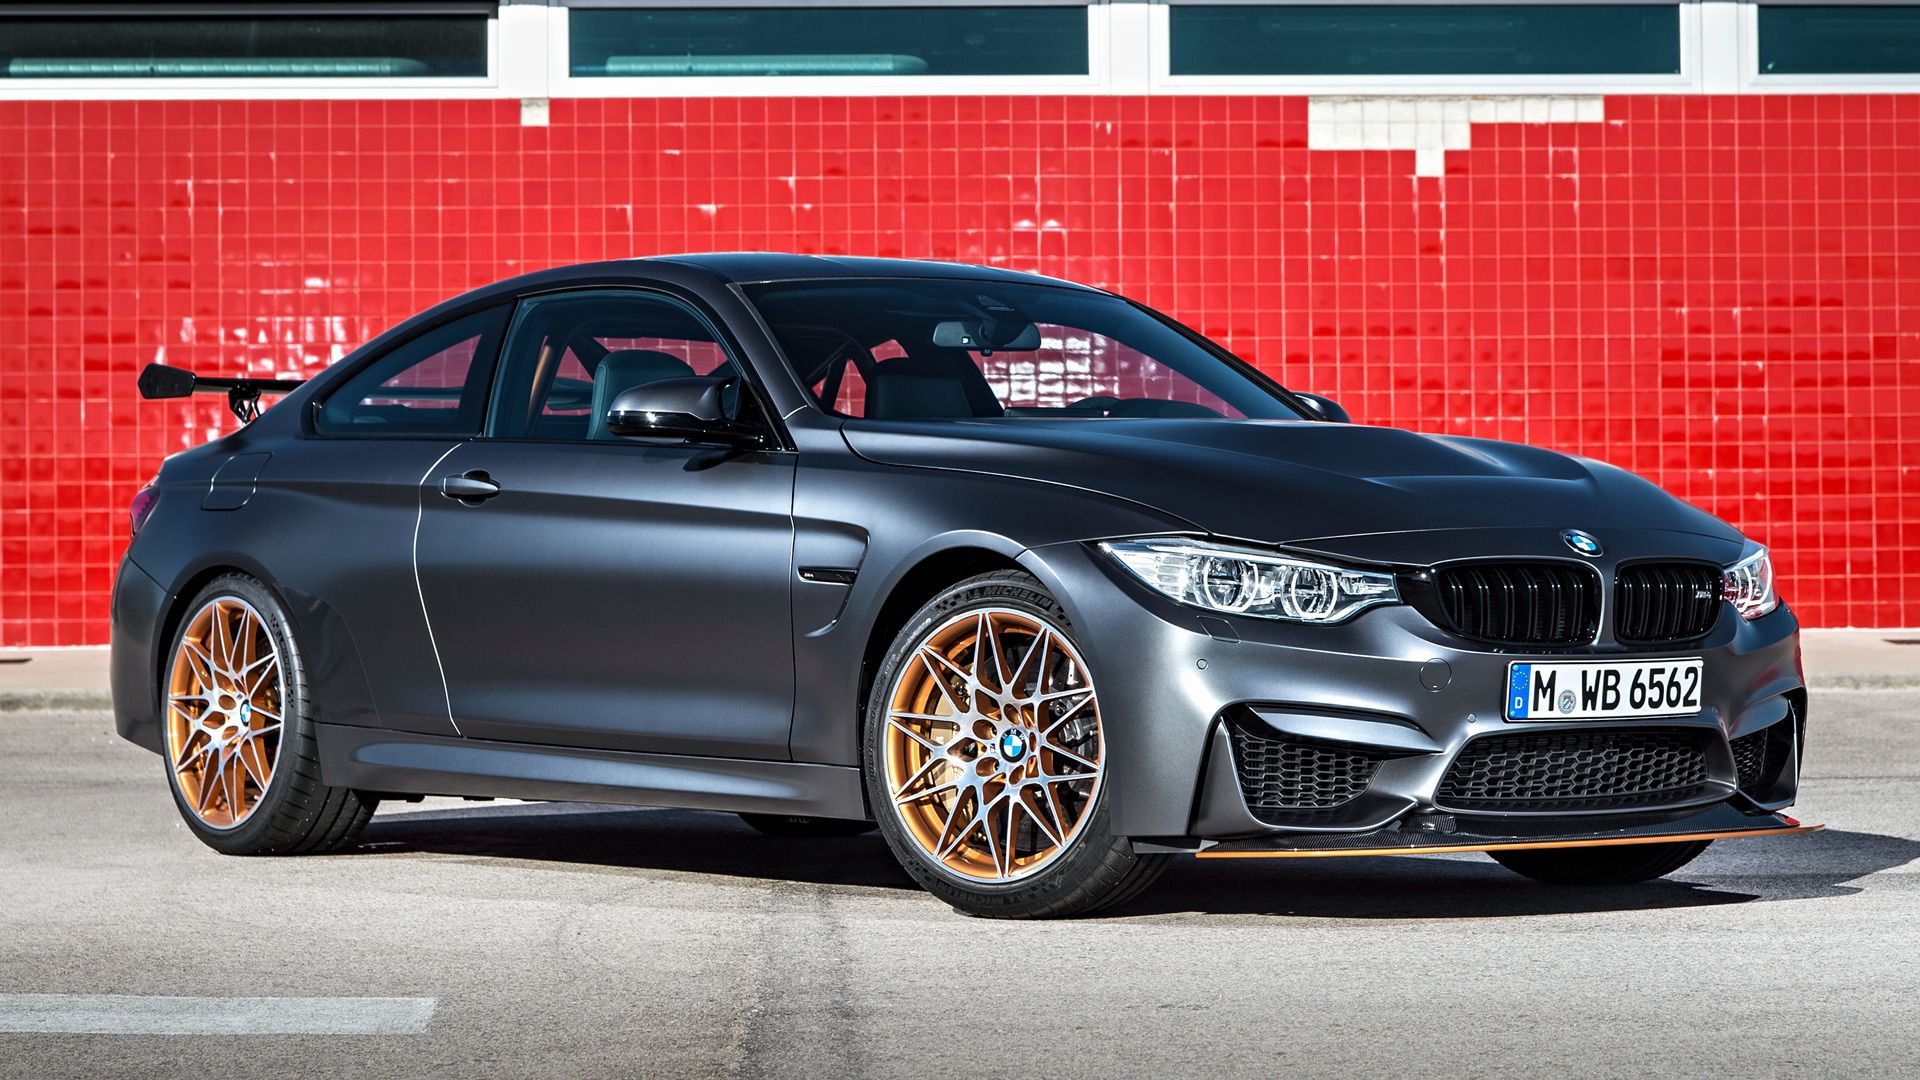 BMW M4 GTS Coupe and HD Image